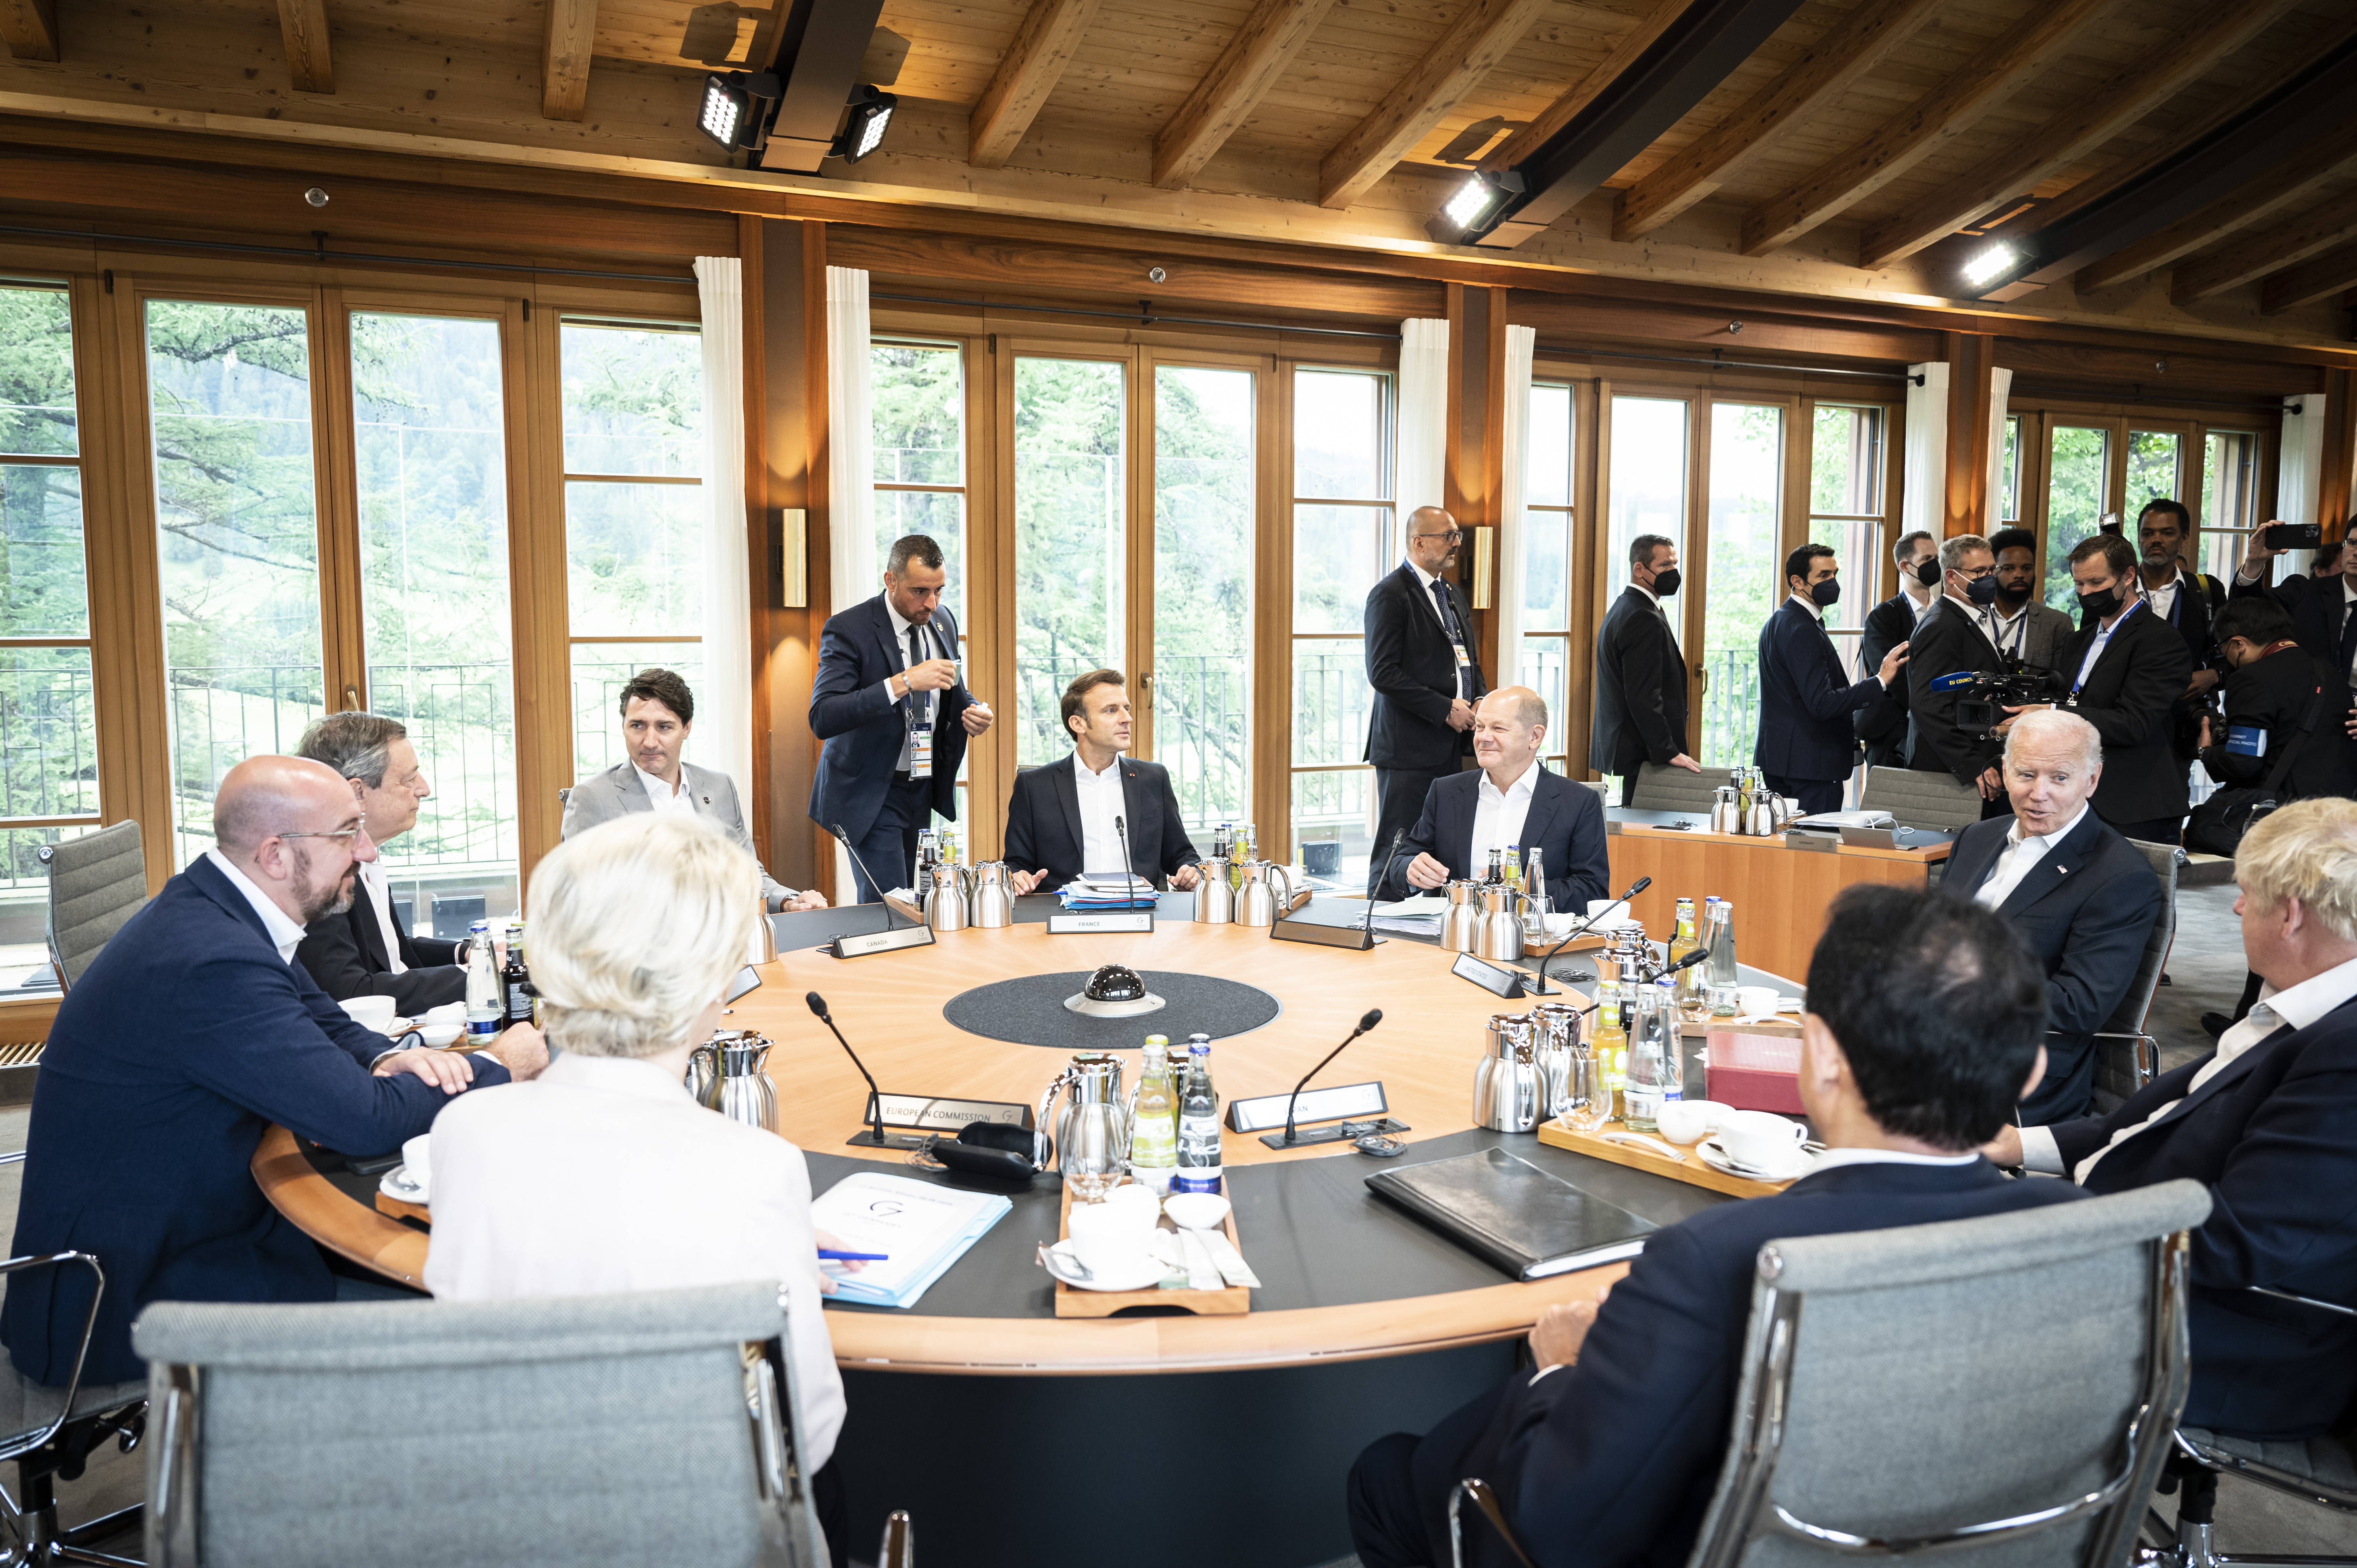 The G7 heads of state and government around the conference table at the start of the seventh working session.